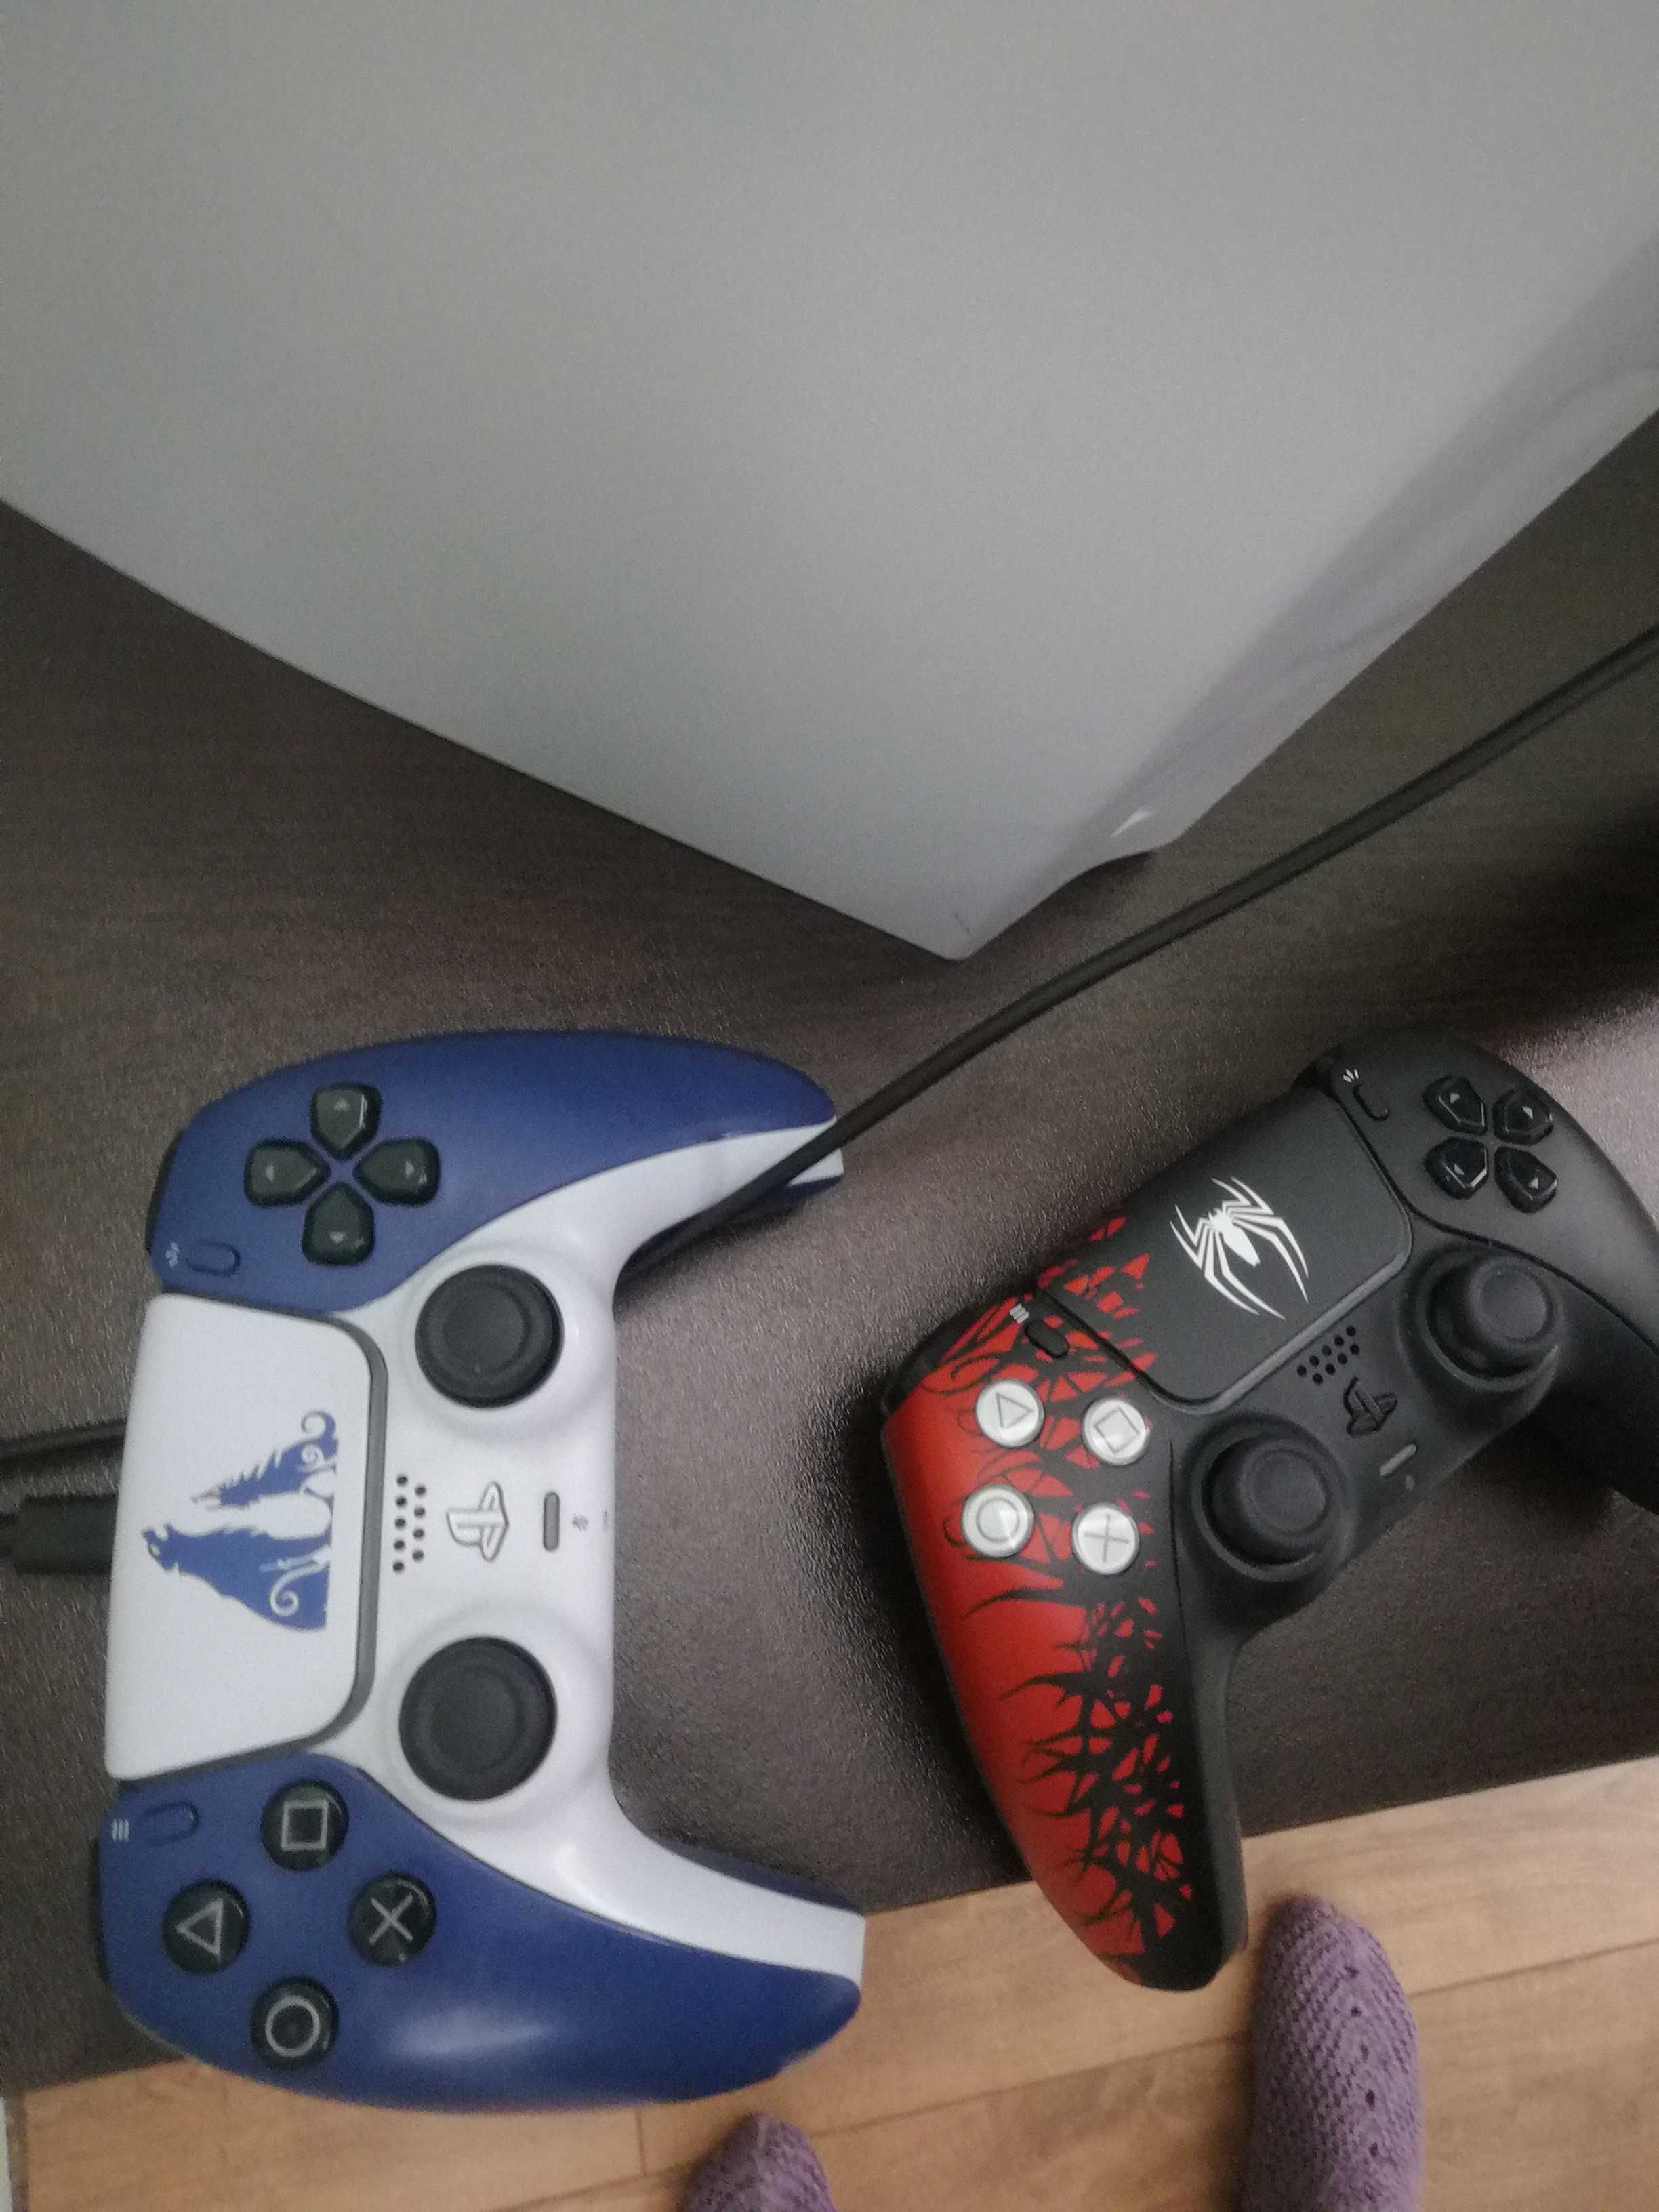 Ps5 disk edition Spider-man, God of war controllers